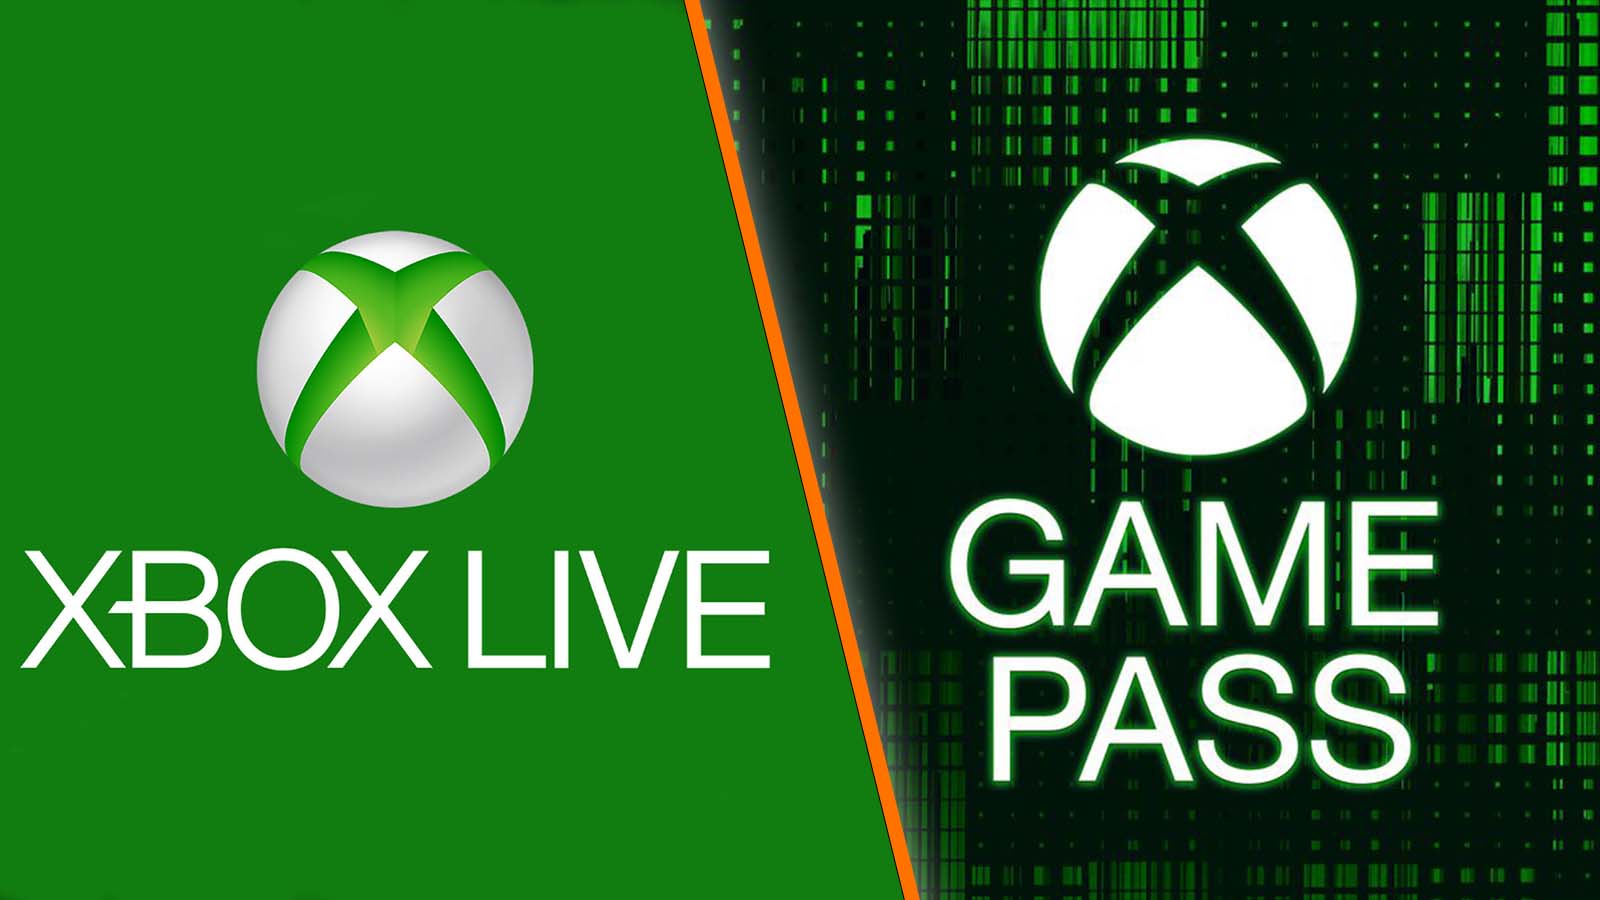 Xbox Live and Xbox Game Pass